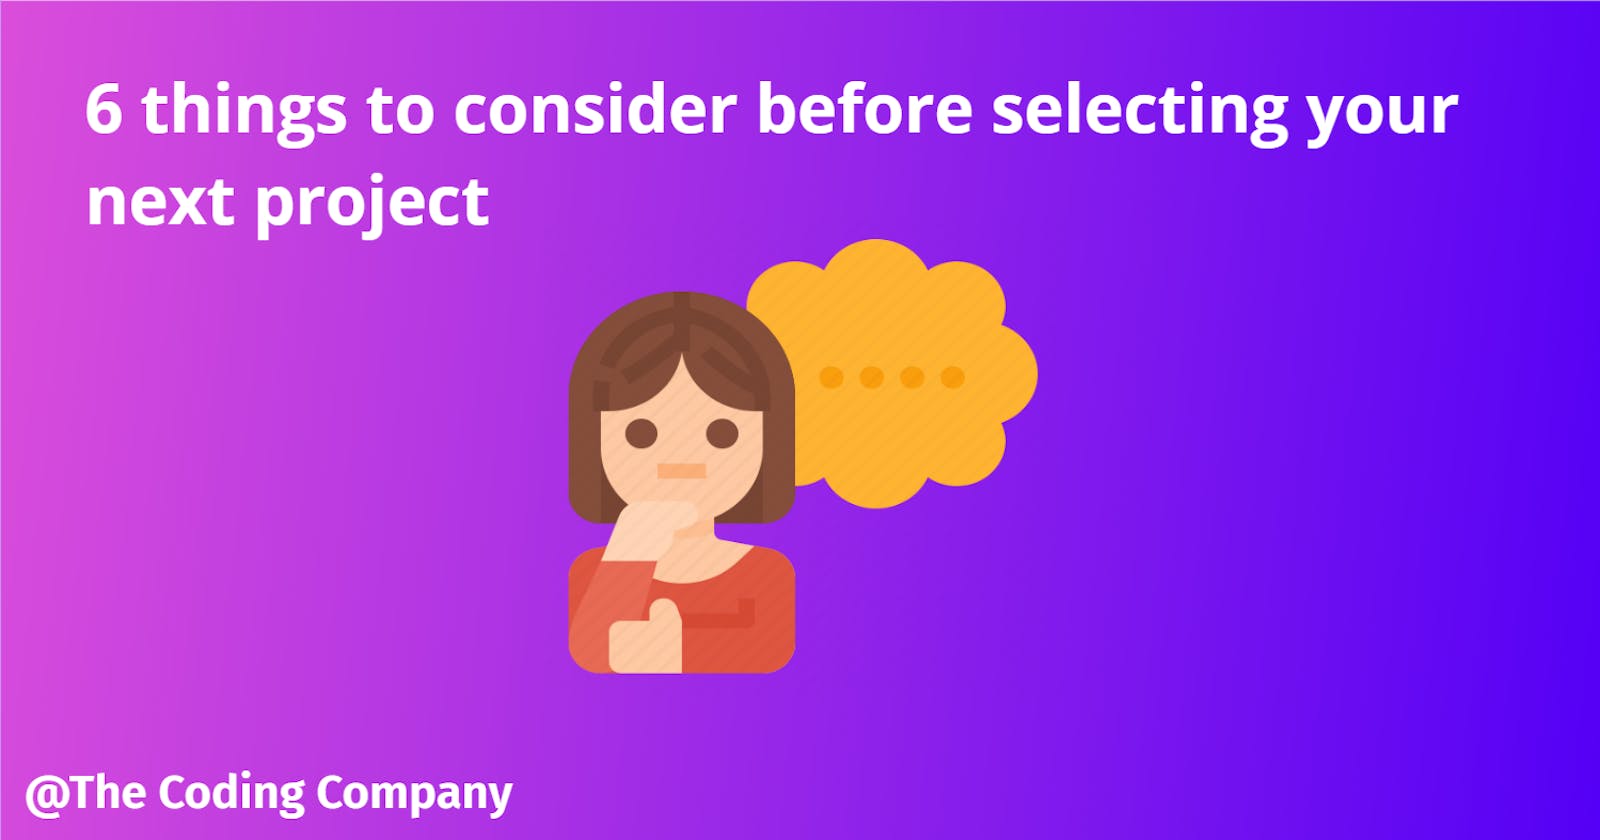 6 Things to consider before selecting your next project